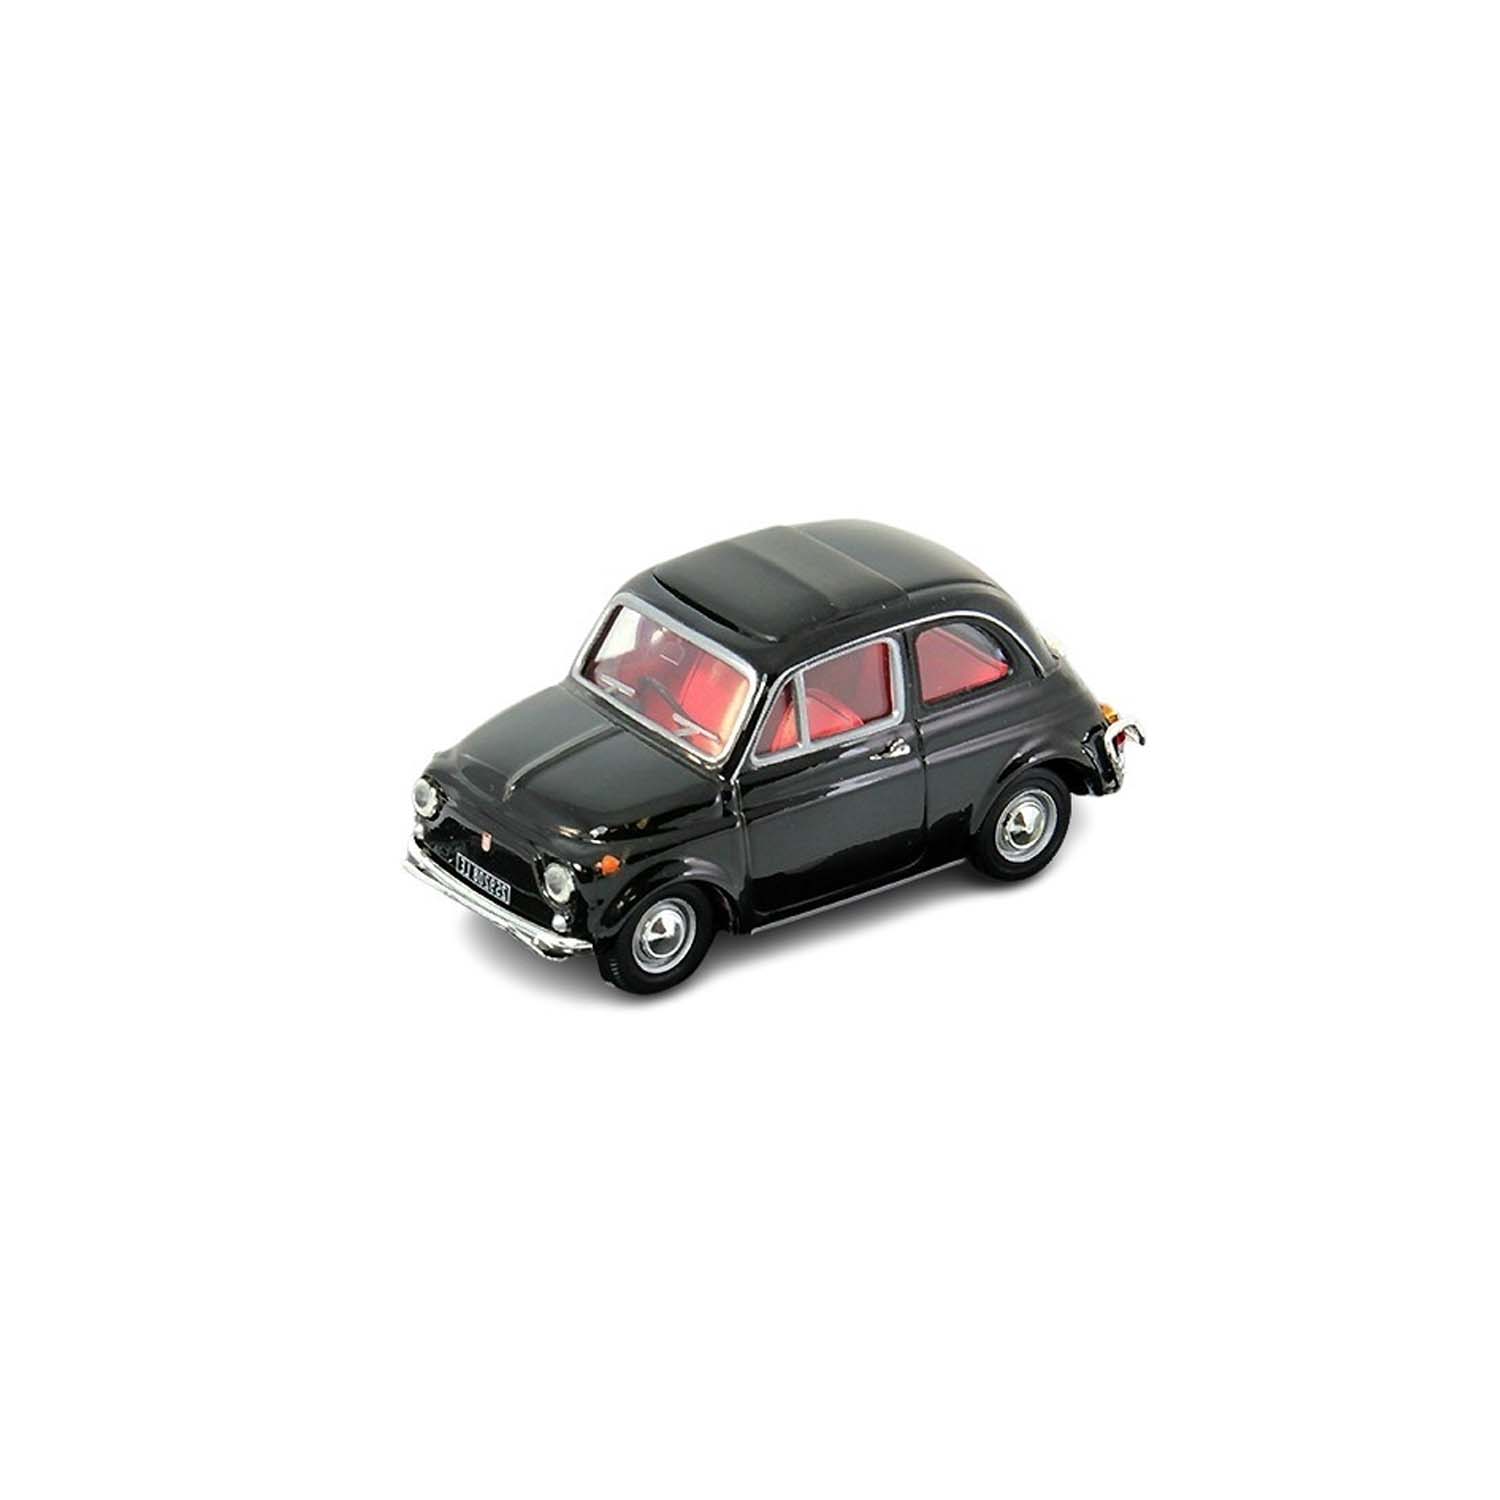 Fiat 500 F 1965 | 1:43 Scale Model-1:43 Scale Model-Spark Models-gpx-store